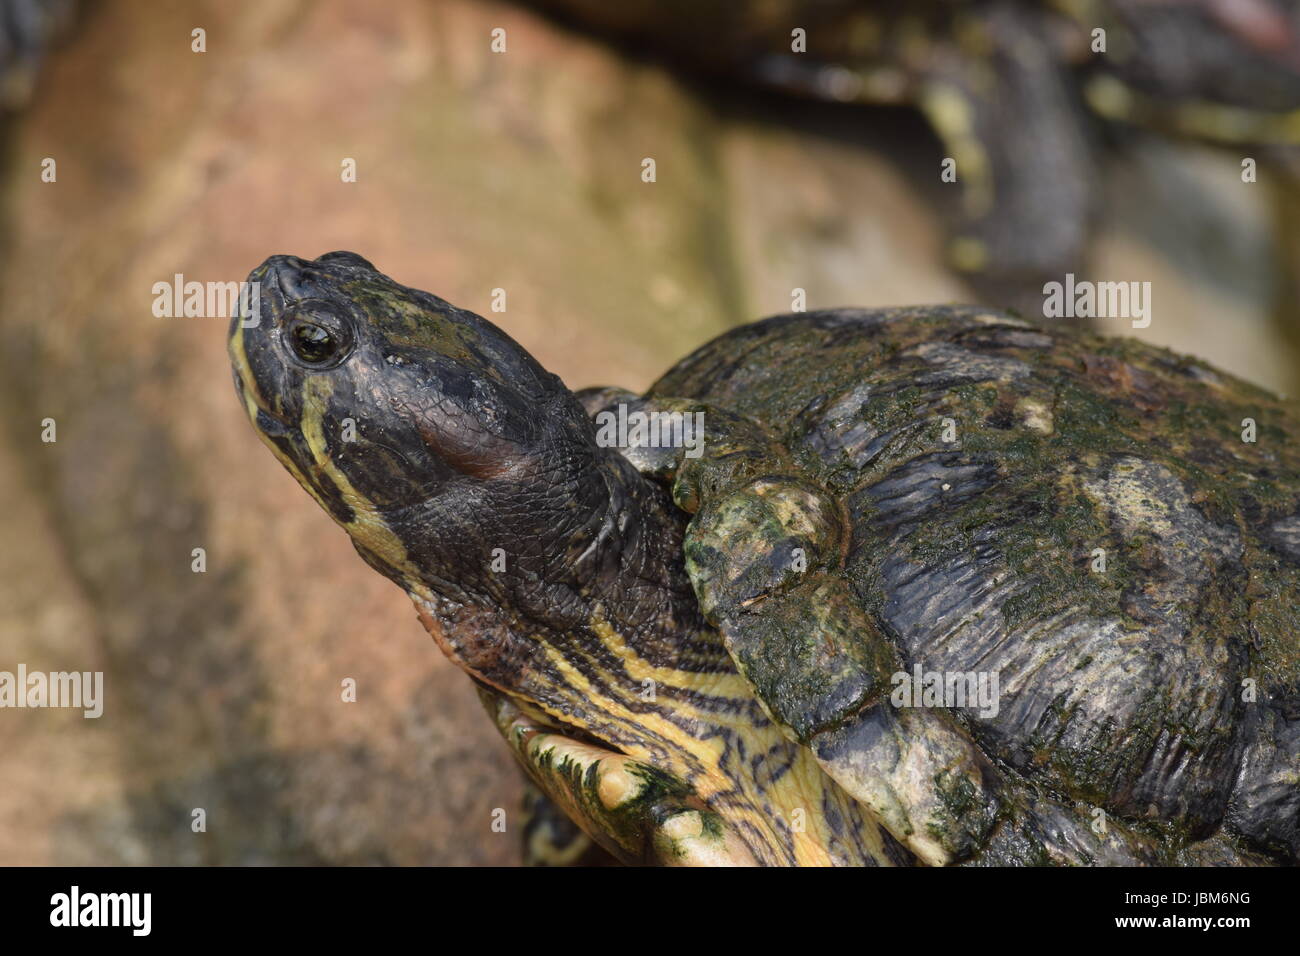 Red-ear Slider. They are almost entirely aquatic, but as they're cold-blooded, they leave the water to sunbathe to regulate their temperature. Stock Photo